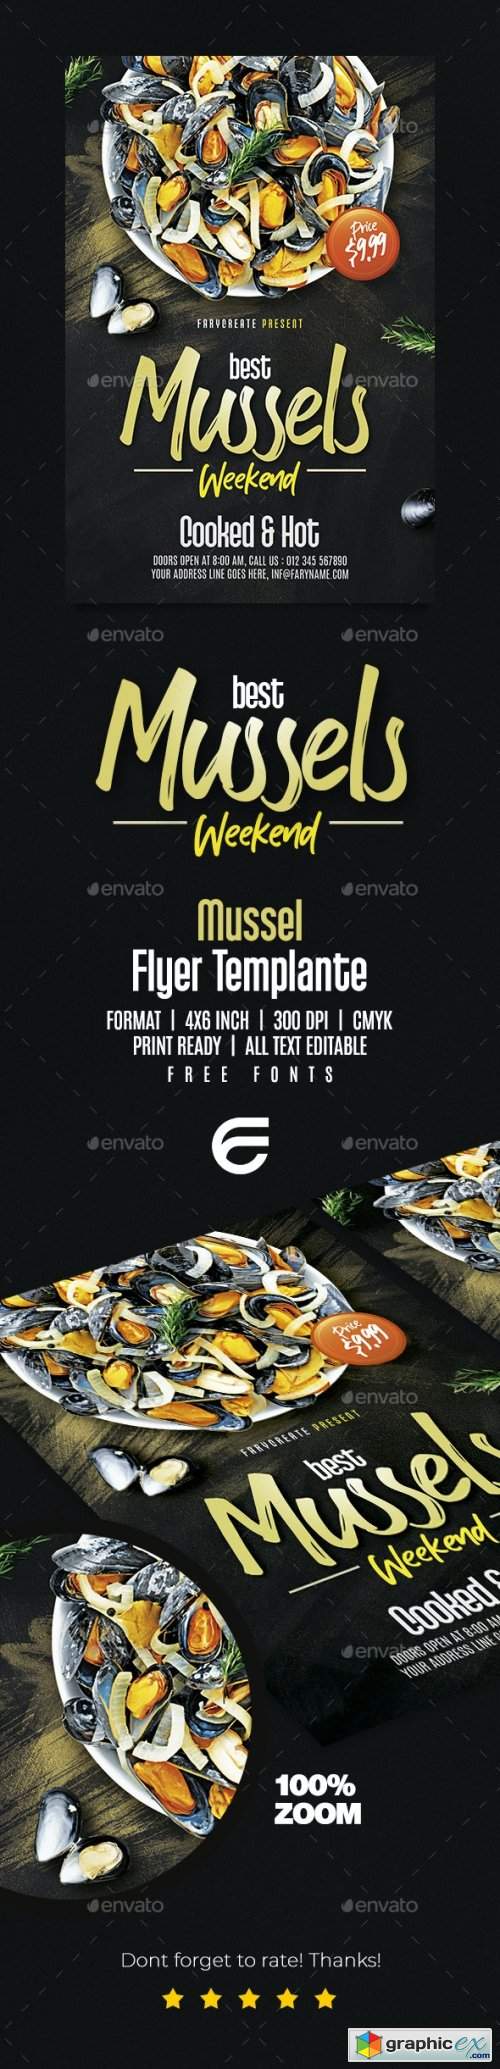 Mussels Seafood Flyer Template 26093306